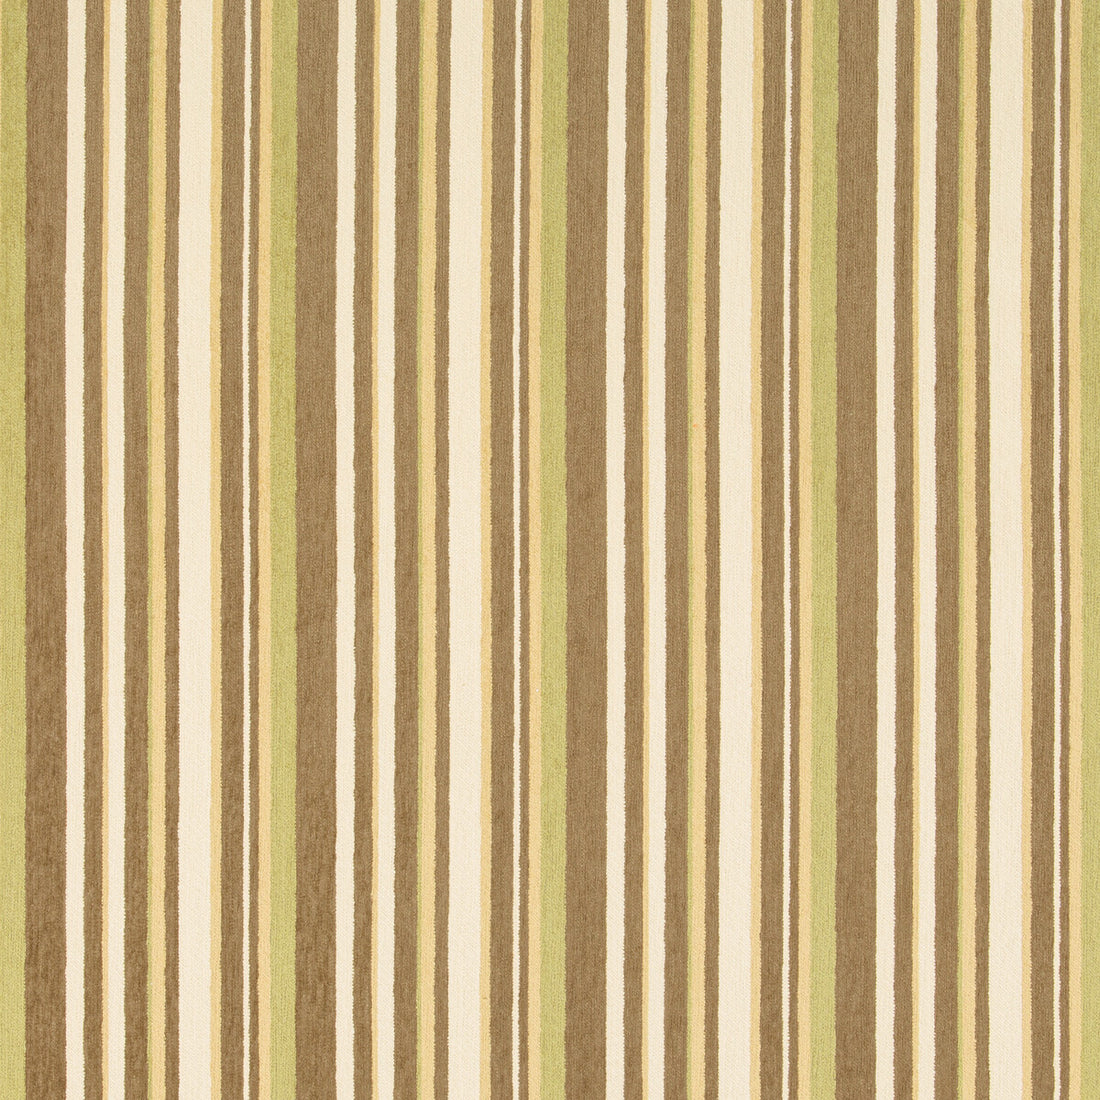 Causeway fabric in boxwood color - pattern 35868.16.0 - by Kravet Contract in the Gis Crypton collection